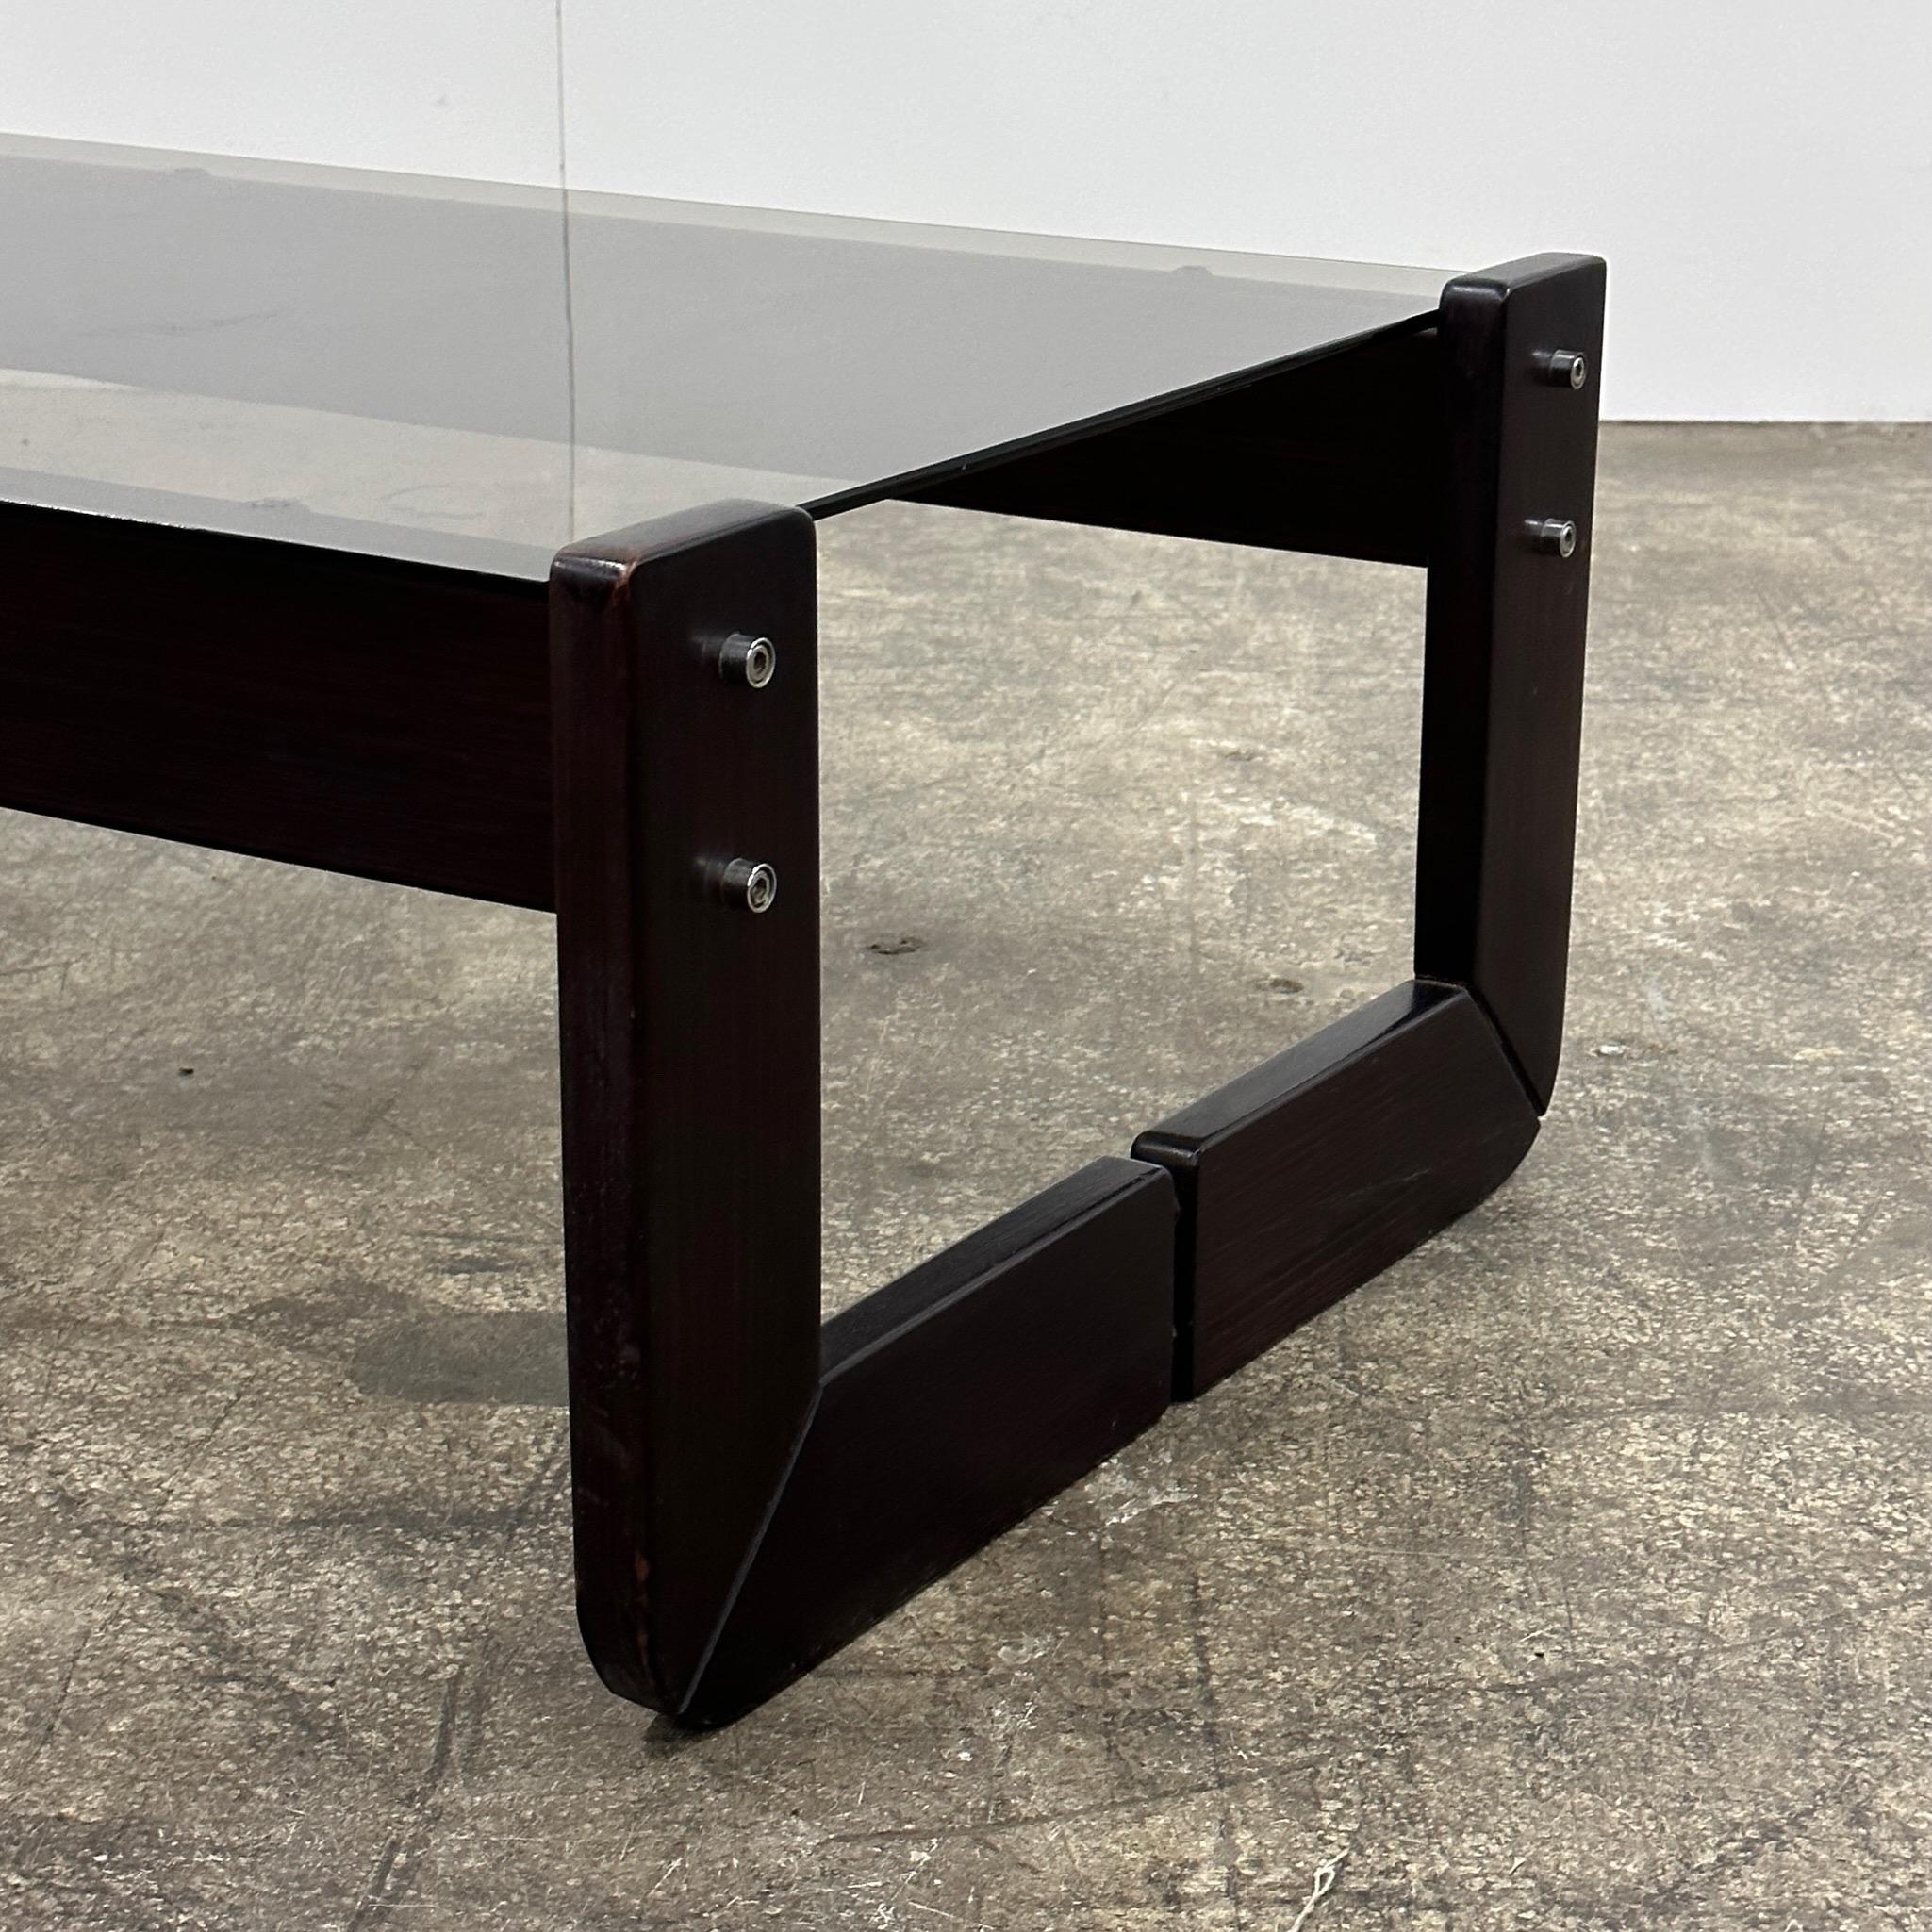 c. 1970s. Table by Percival Lafer made of Jacaranda wood. Made in Brazil, smoked glass top.